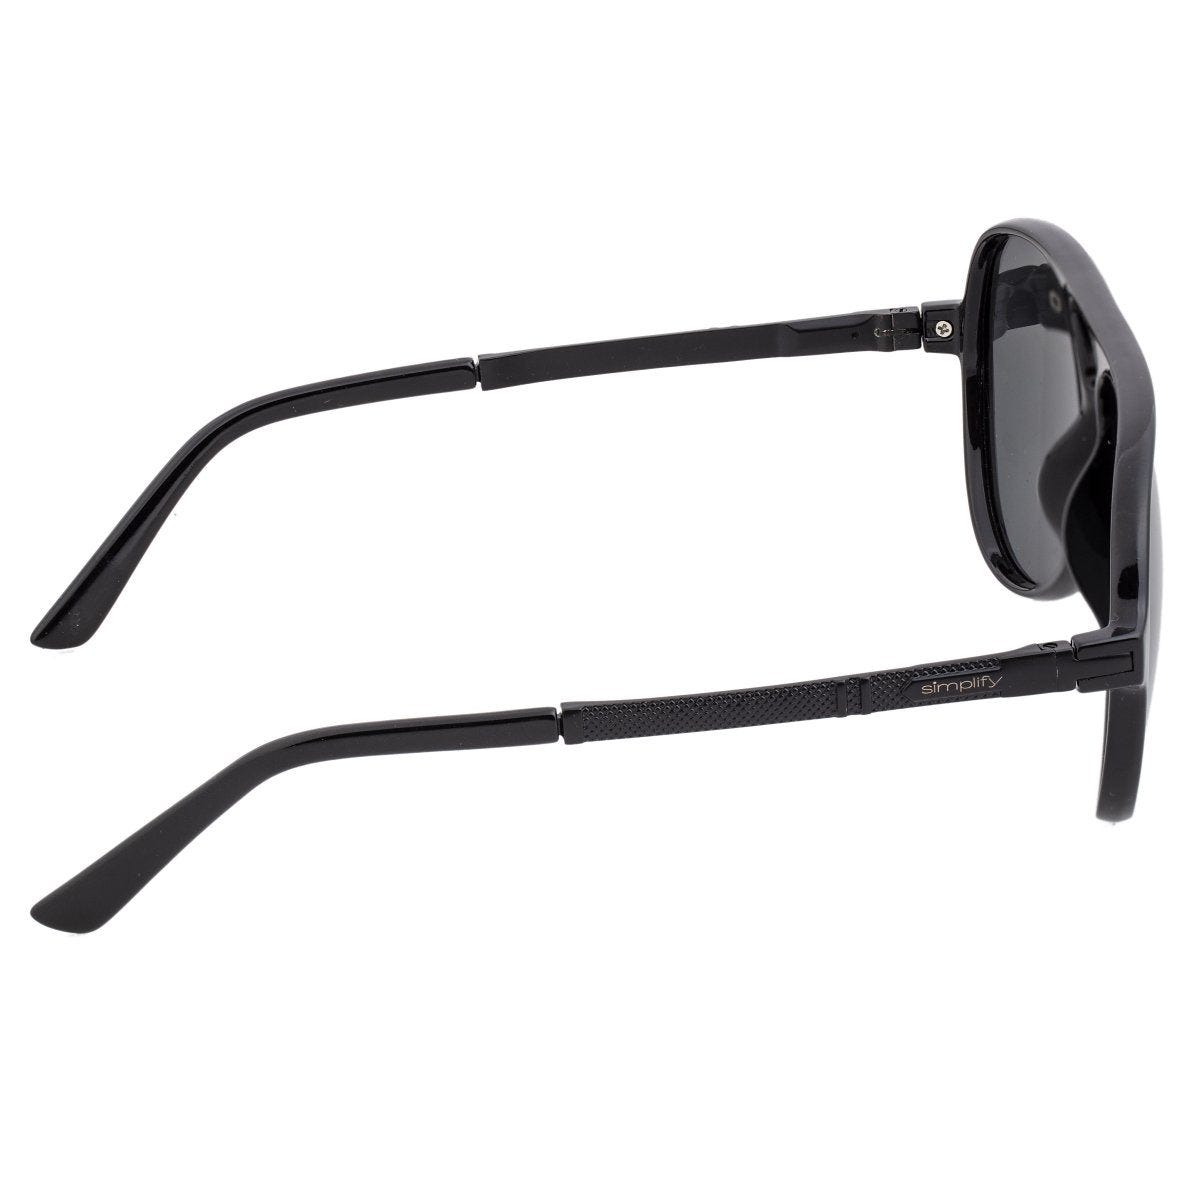 A pair of Simplify polarized sunglasses with black round frames and slim arms, featuring textured detailing near the temples.